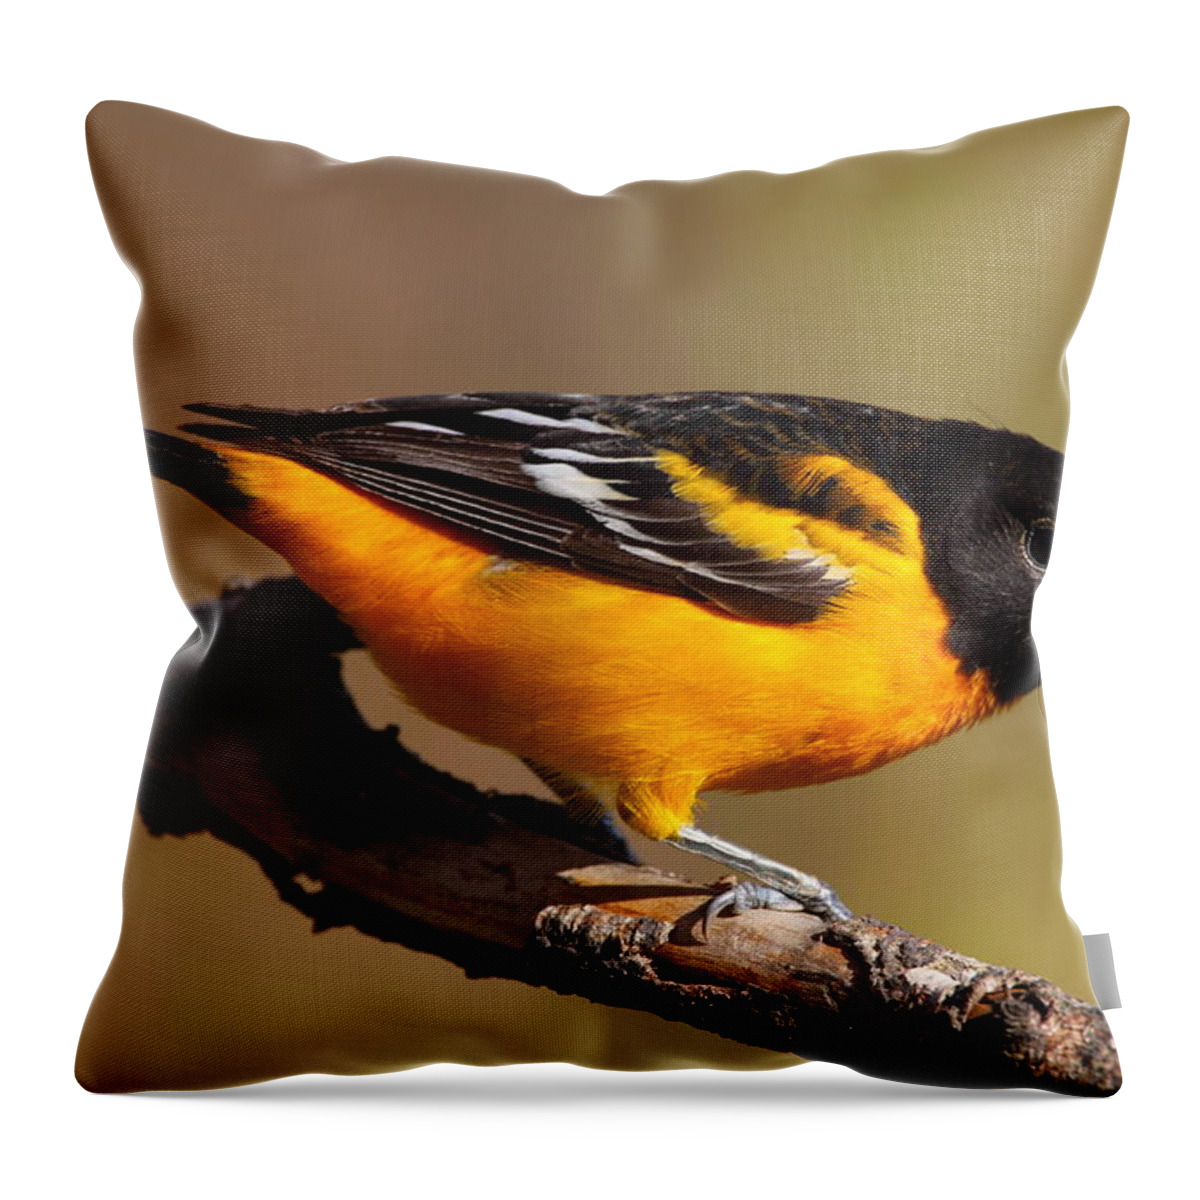 Baltimore Throw Pillow featuring the photograph Baltimore Oriole by Bruce J Robinson